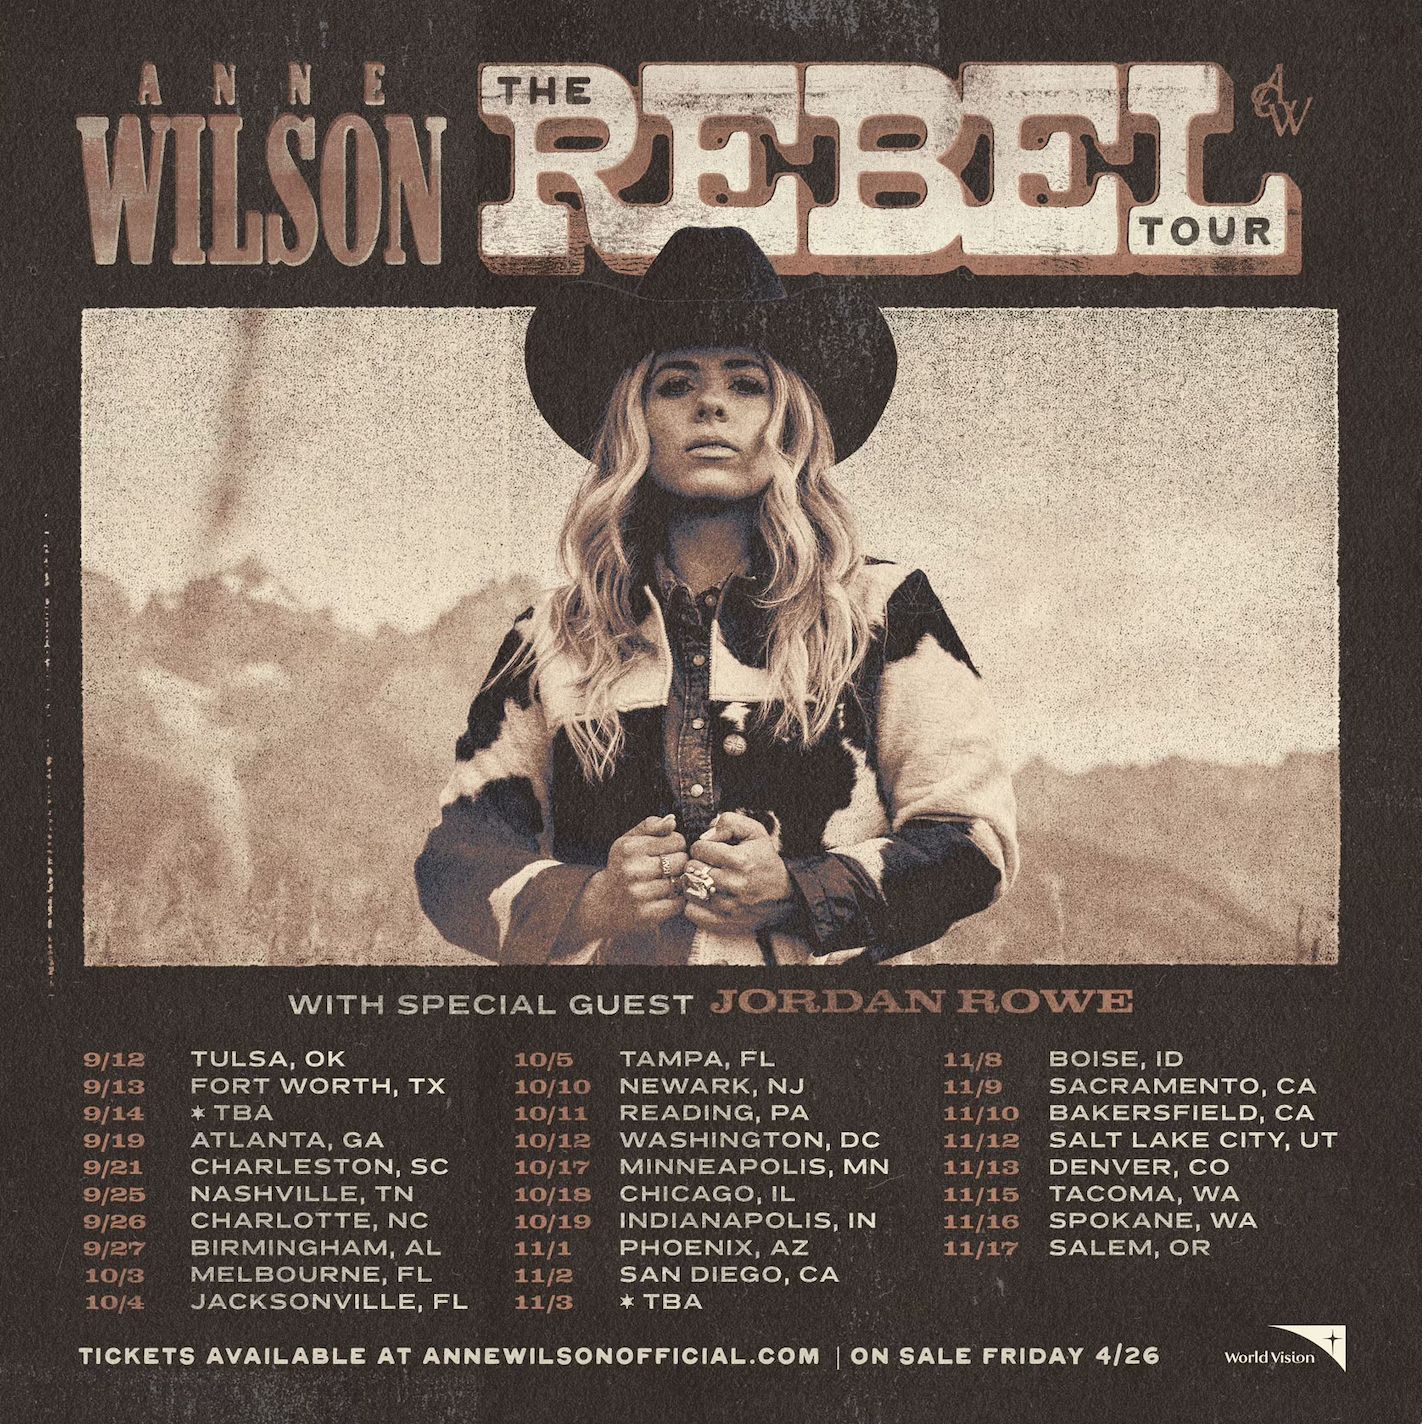 ANNE WILSON BRINGS THE REBEL TOUR TO 28 CITIES NATIONWIDE